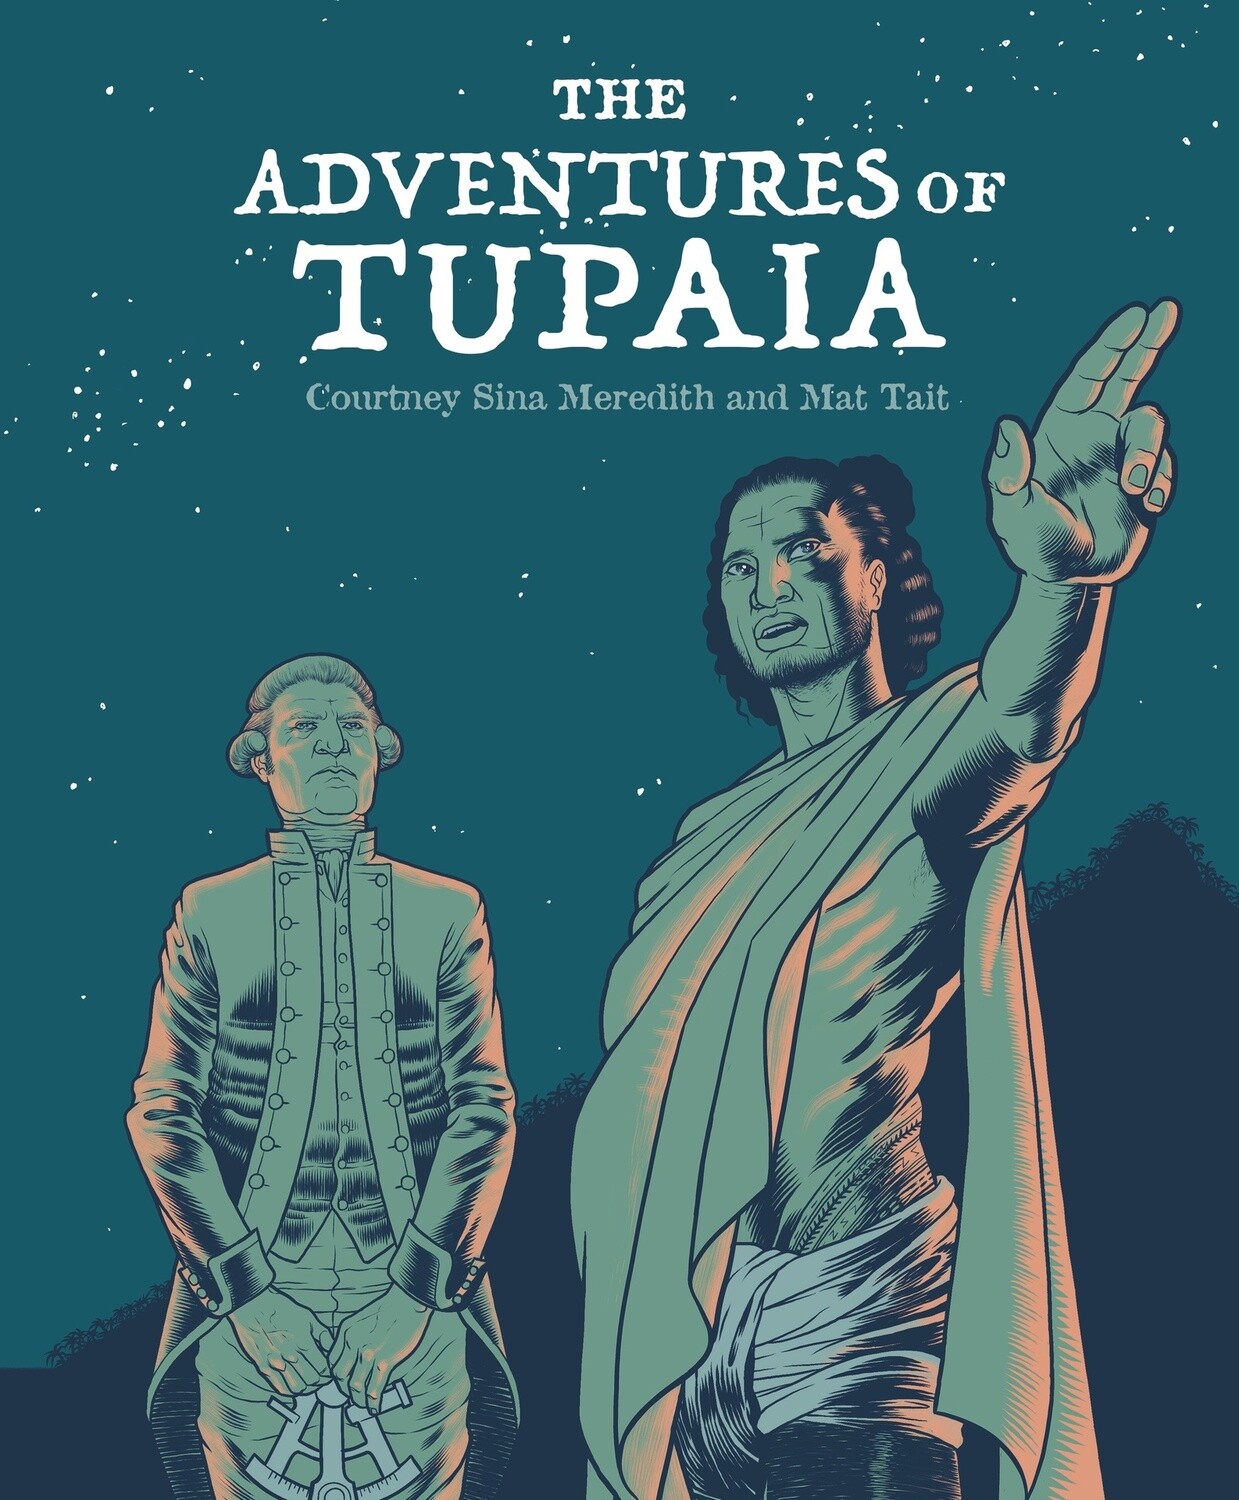 The Adventures of Tupaia by Courtney Sina Meredith and Mat Tait